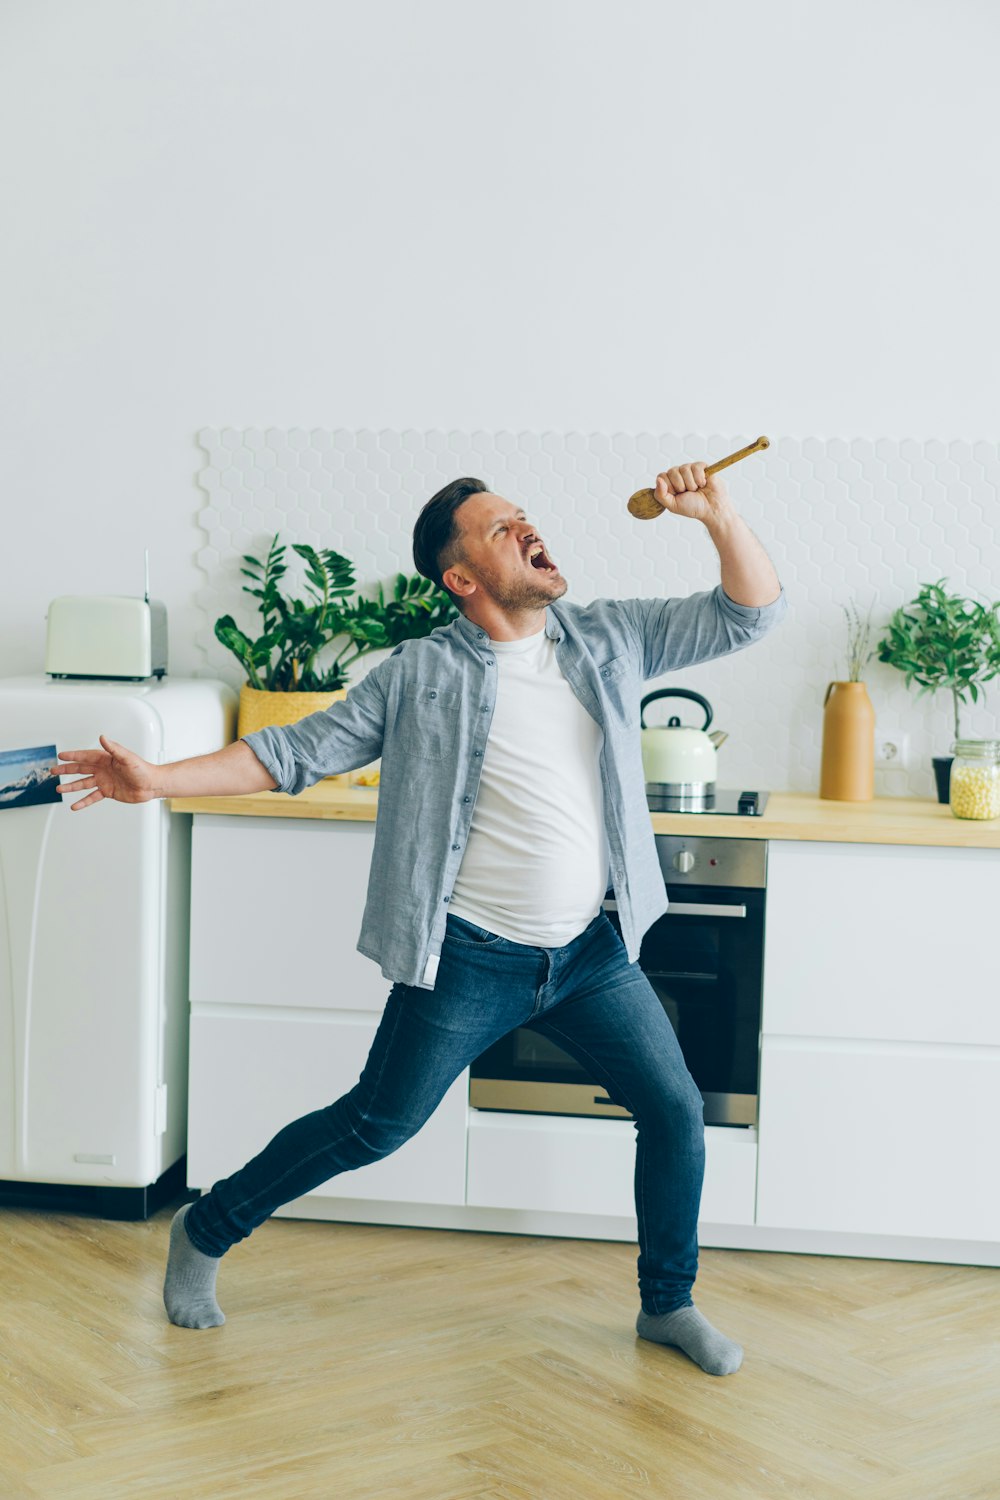 a man is dancing in the kitchen with a hammer in his hand